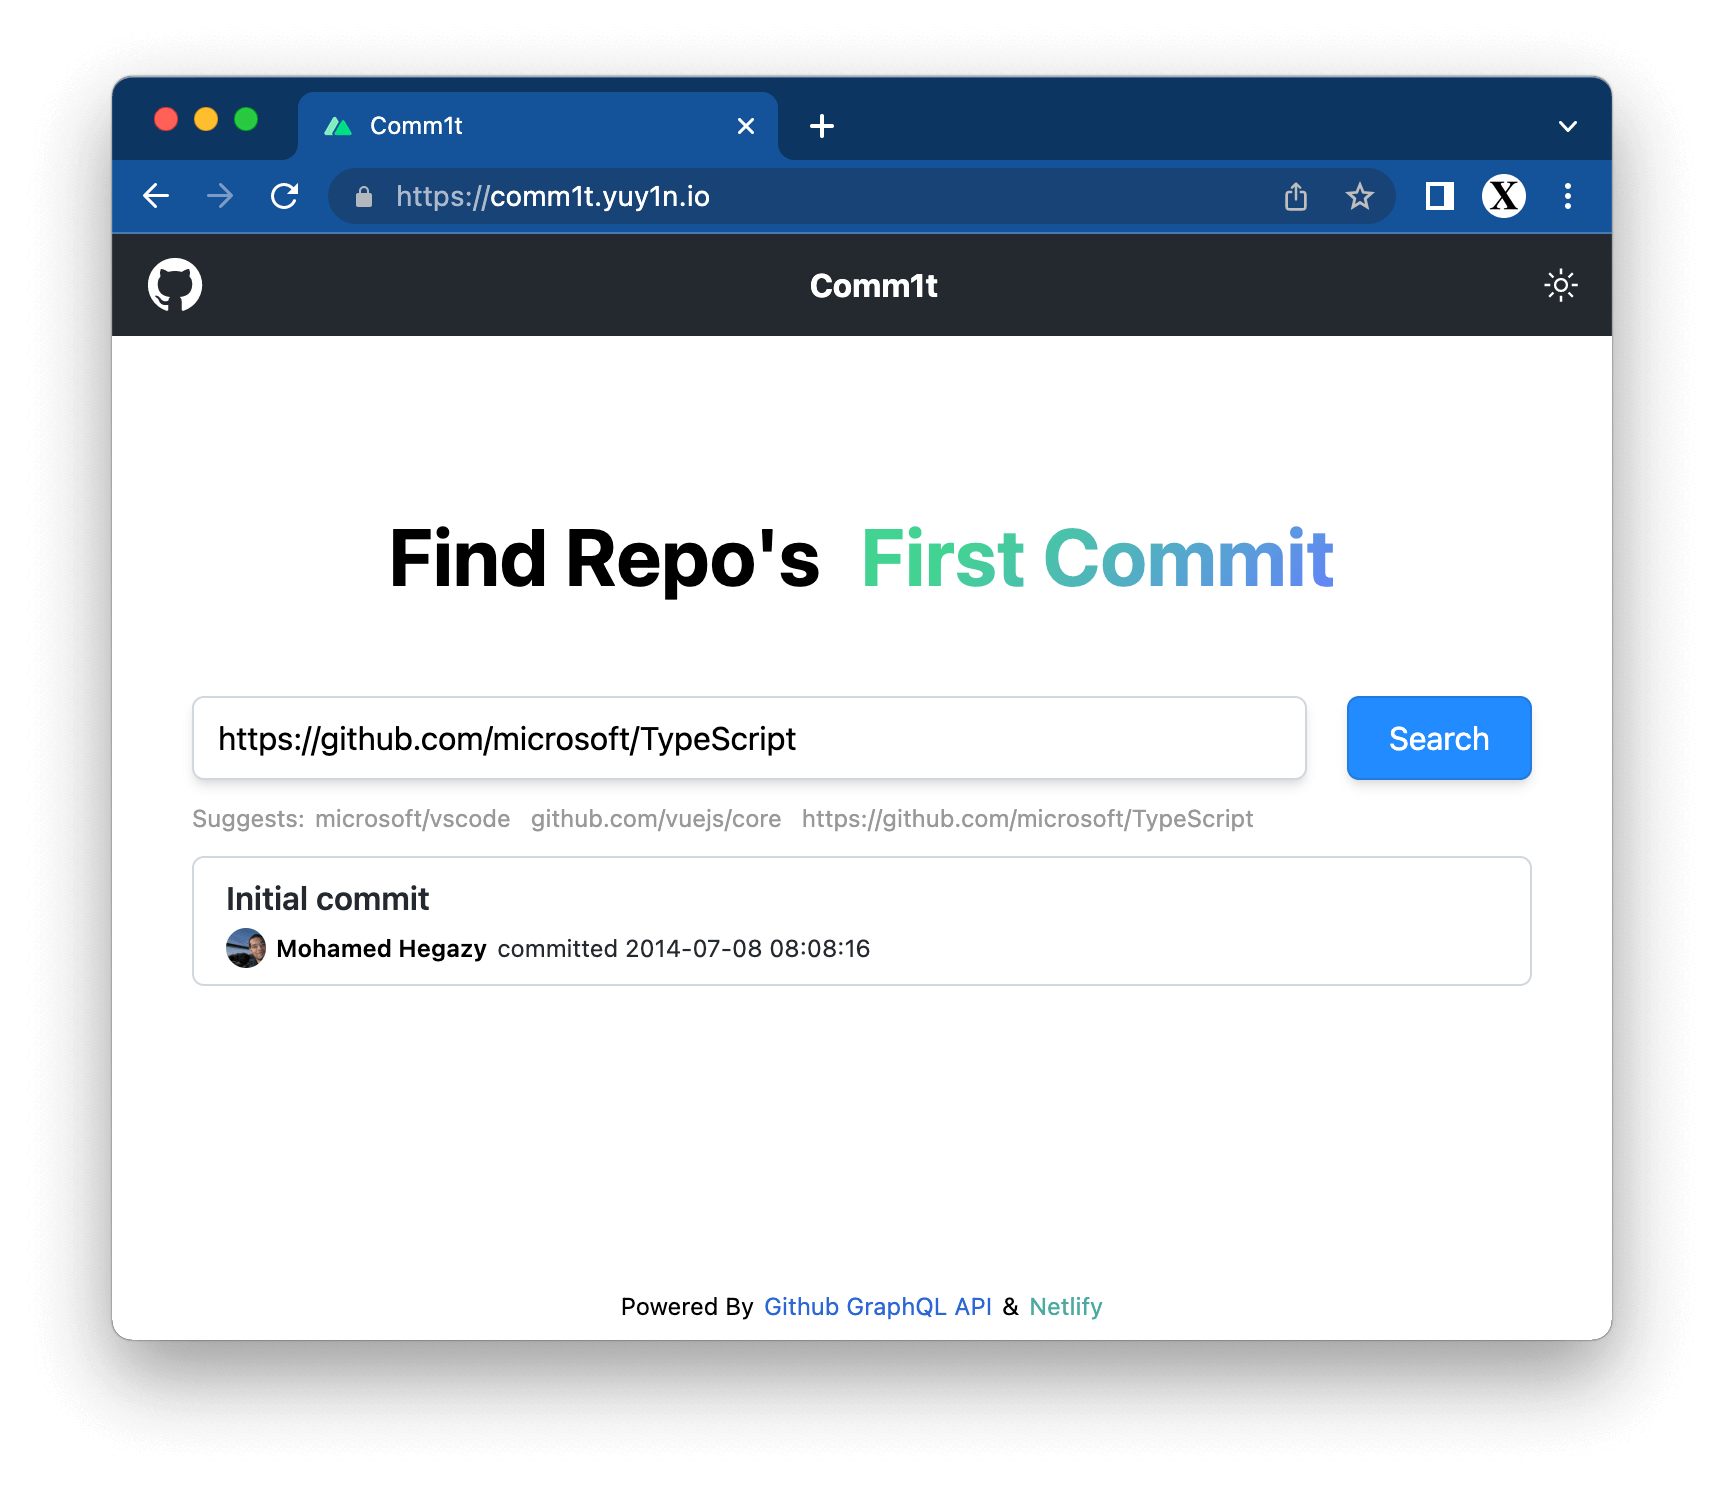 Comm1t - Find Repo's First Commit